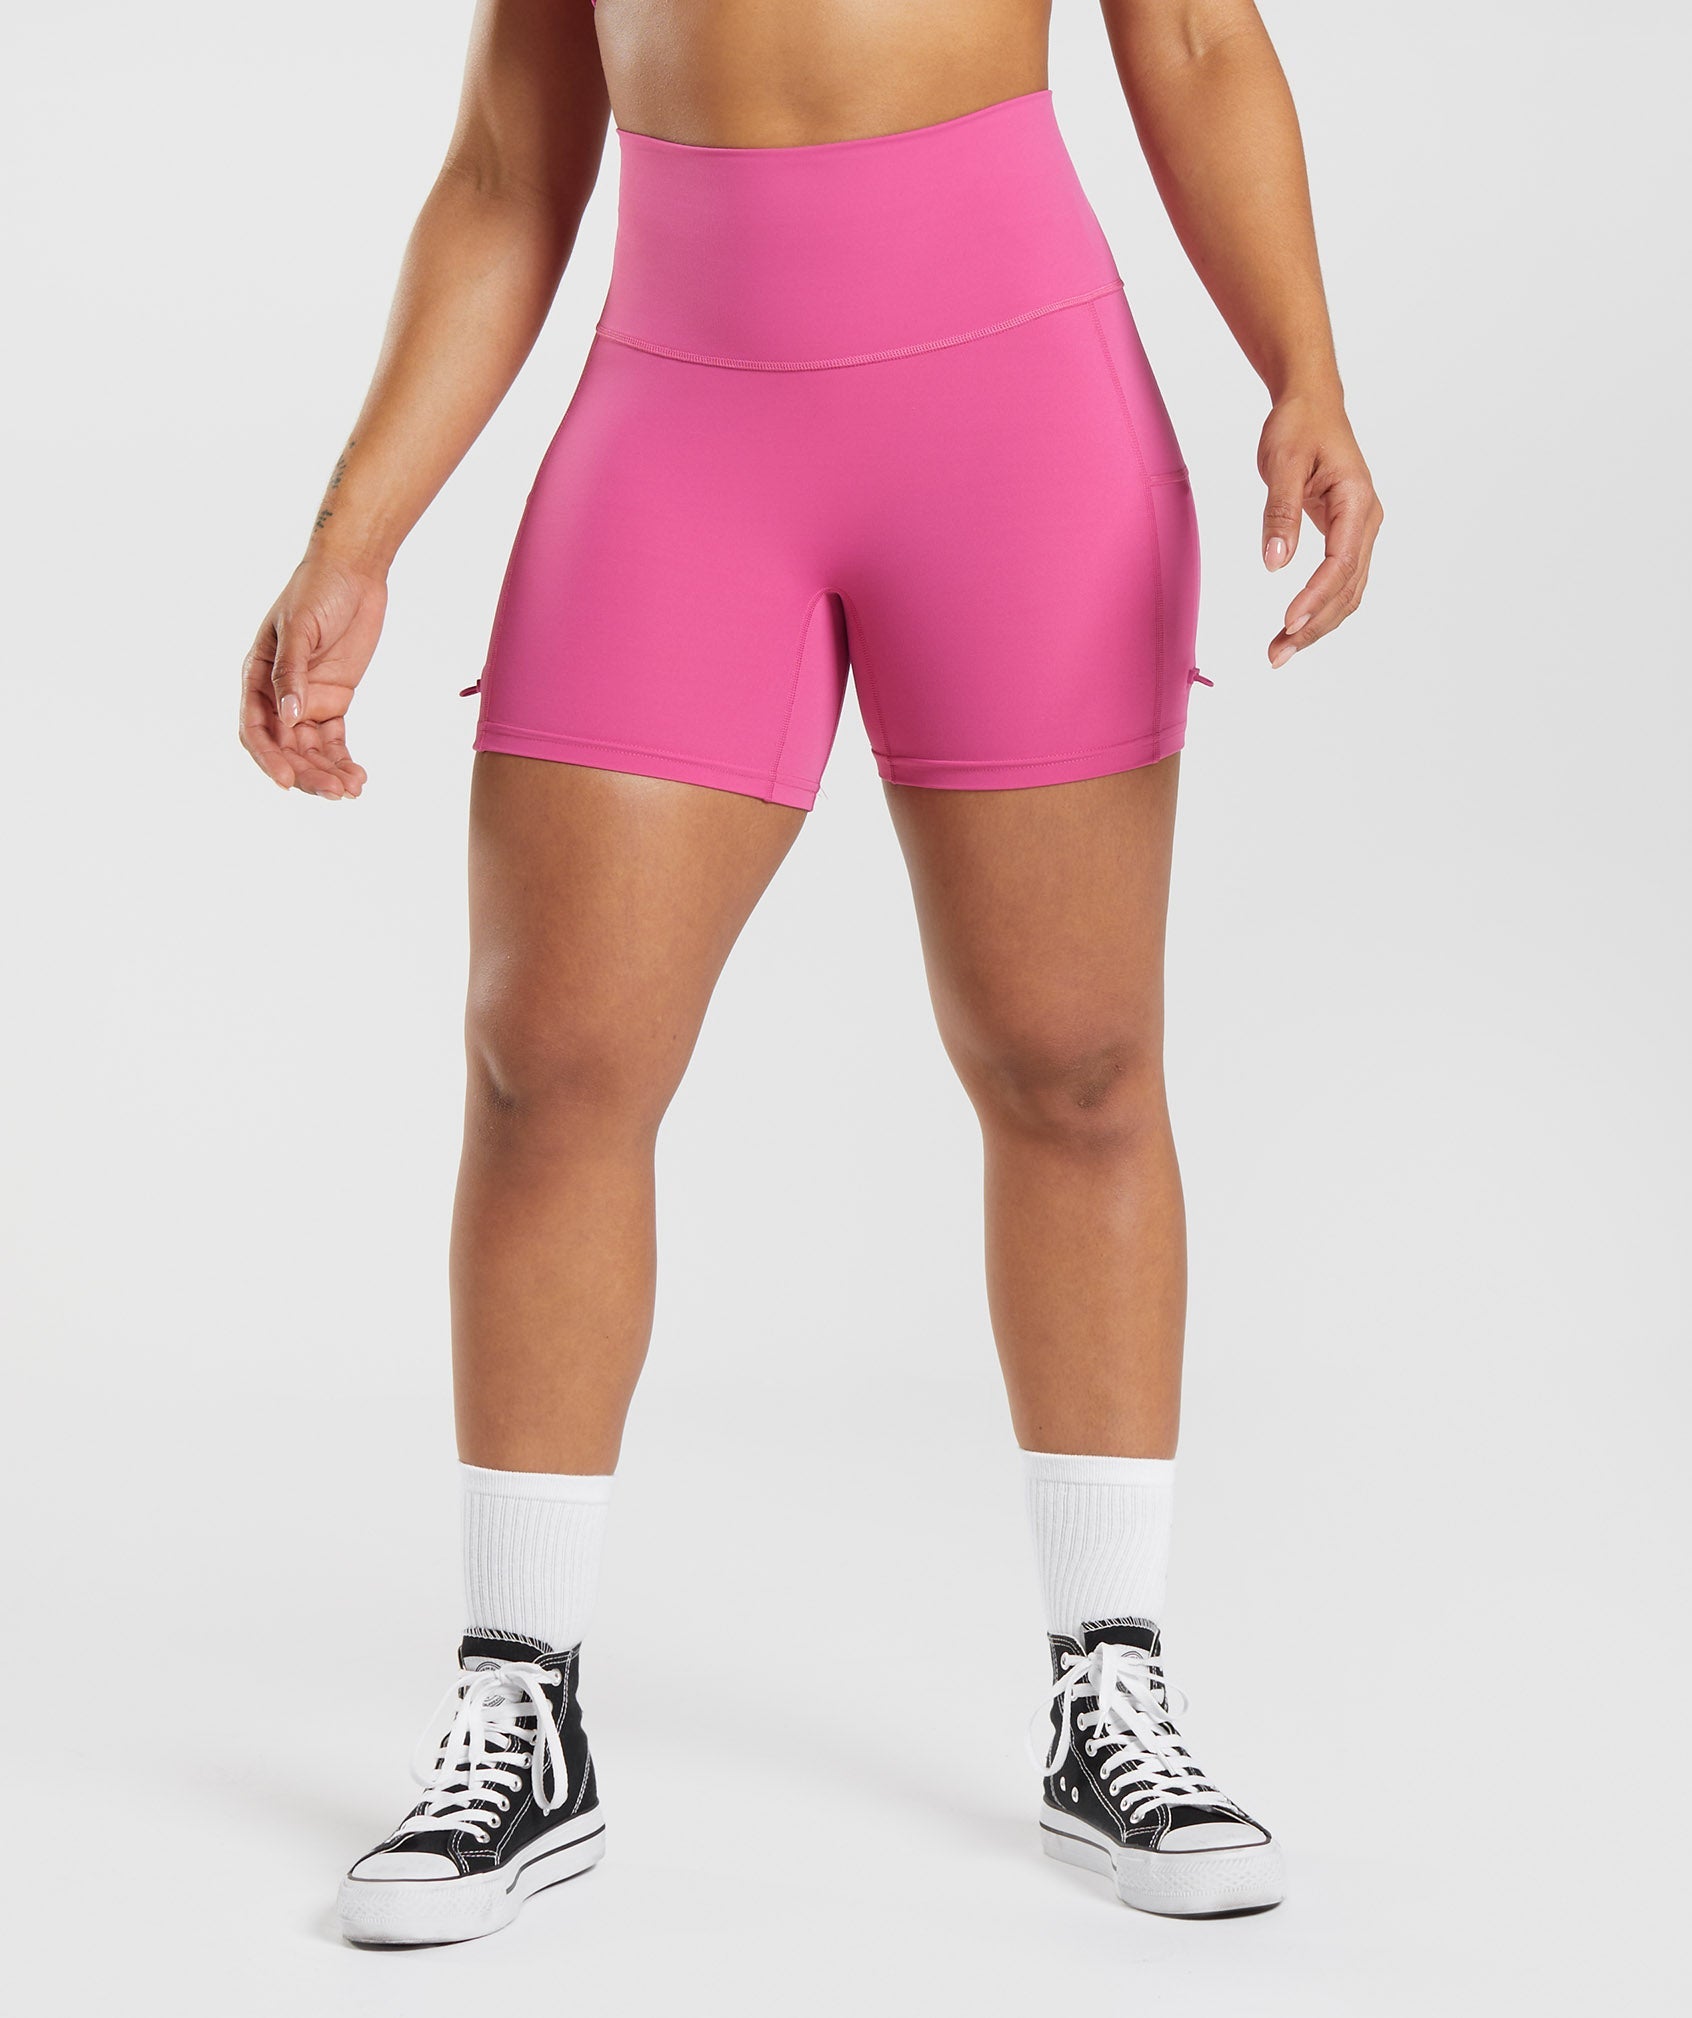 NEW Tiger Mist Toronto Mesh Ruched Booty Shorts XS Pink High